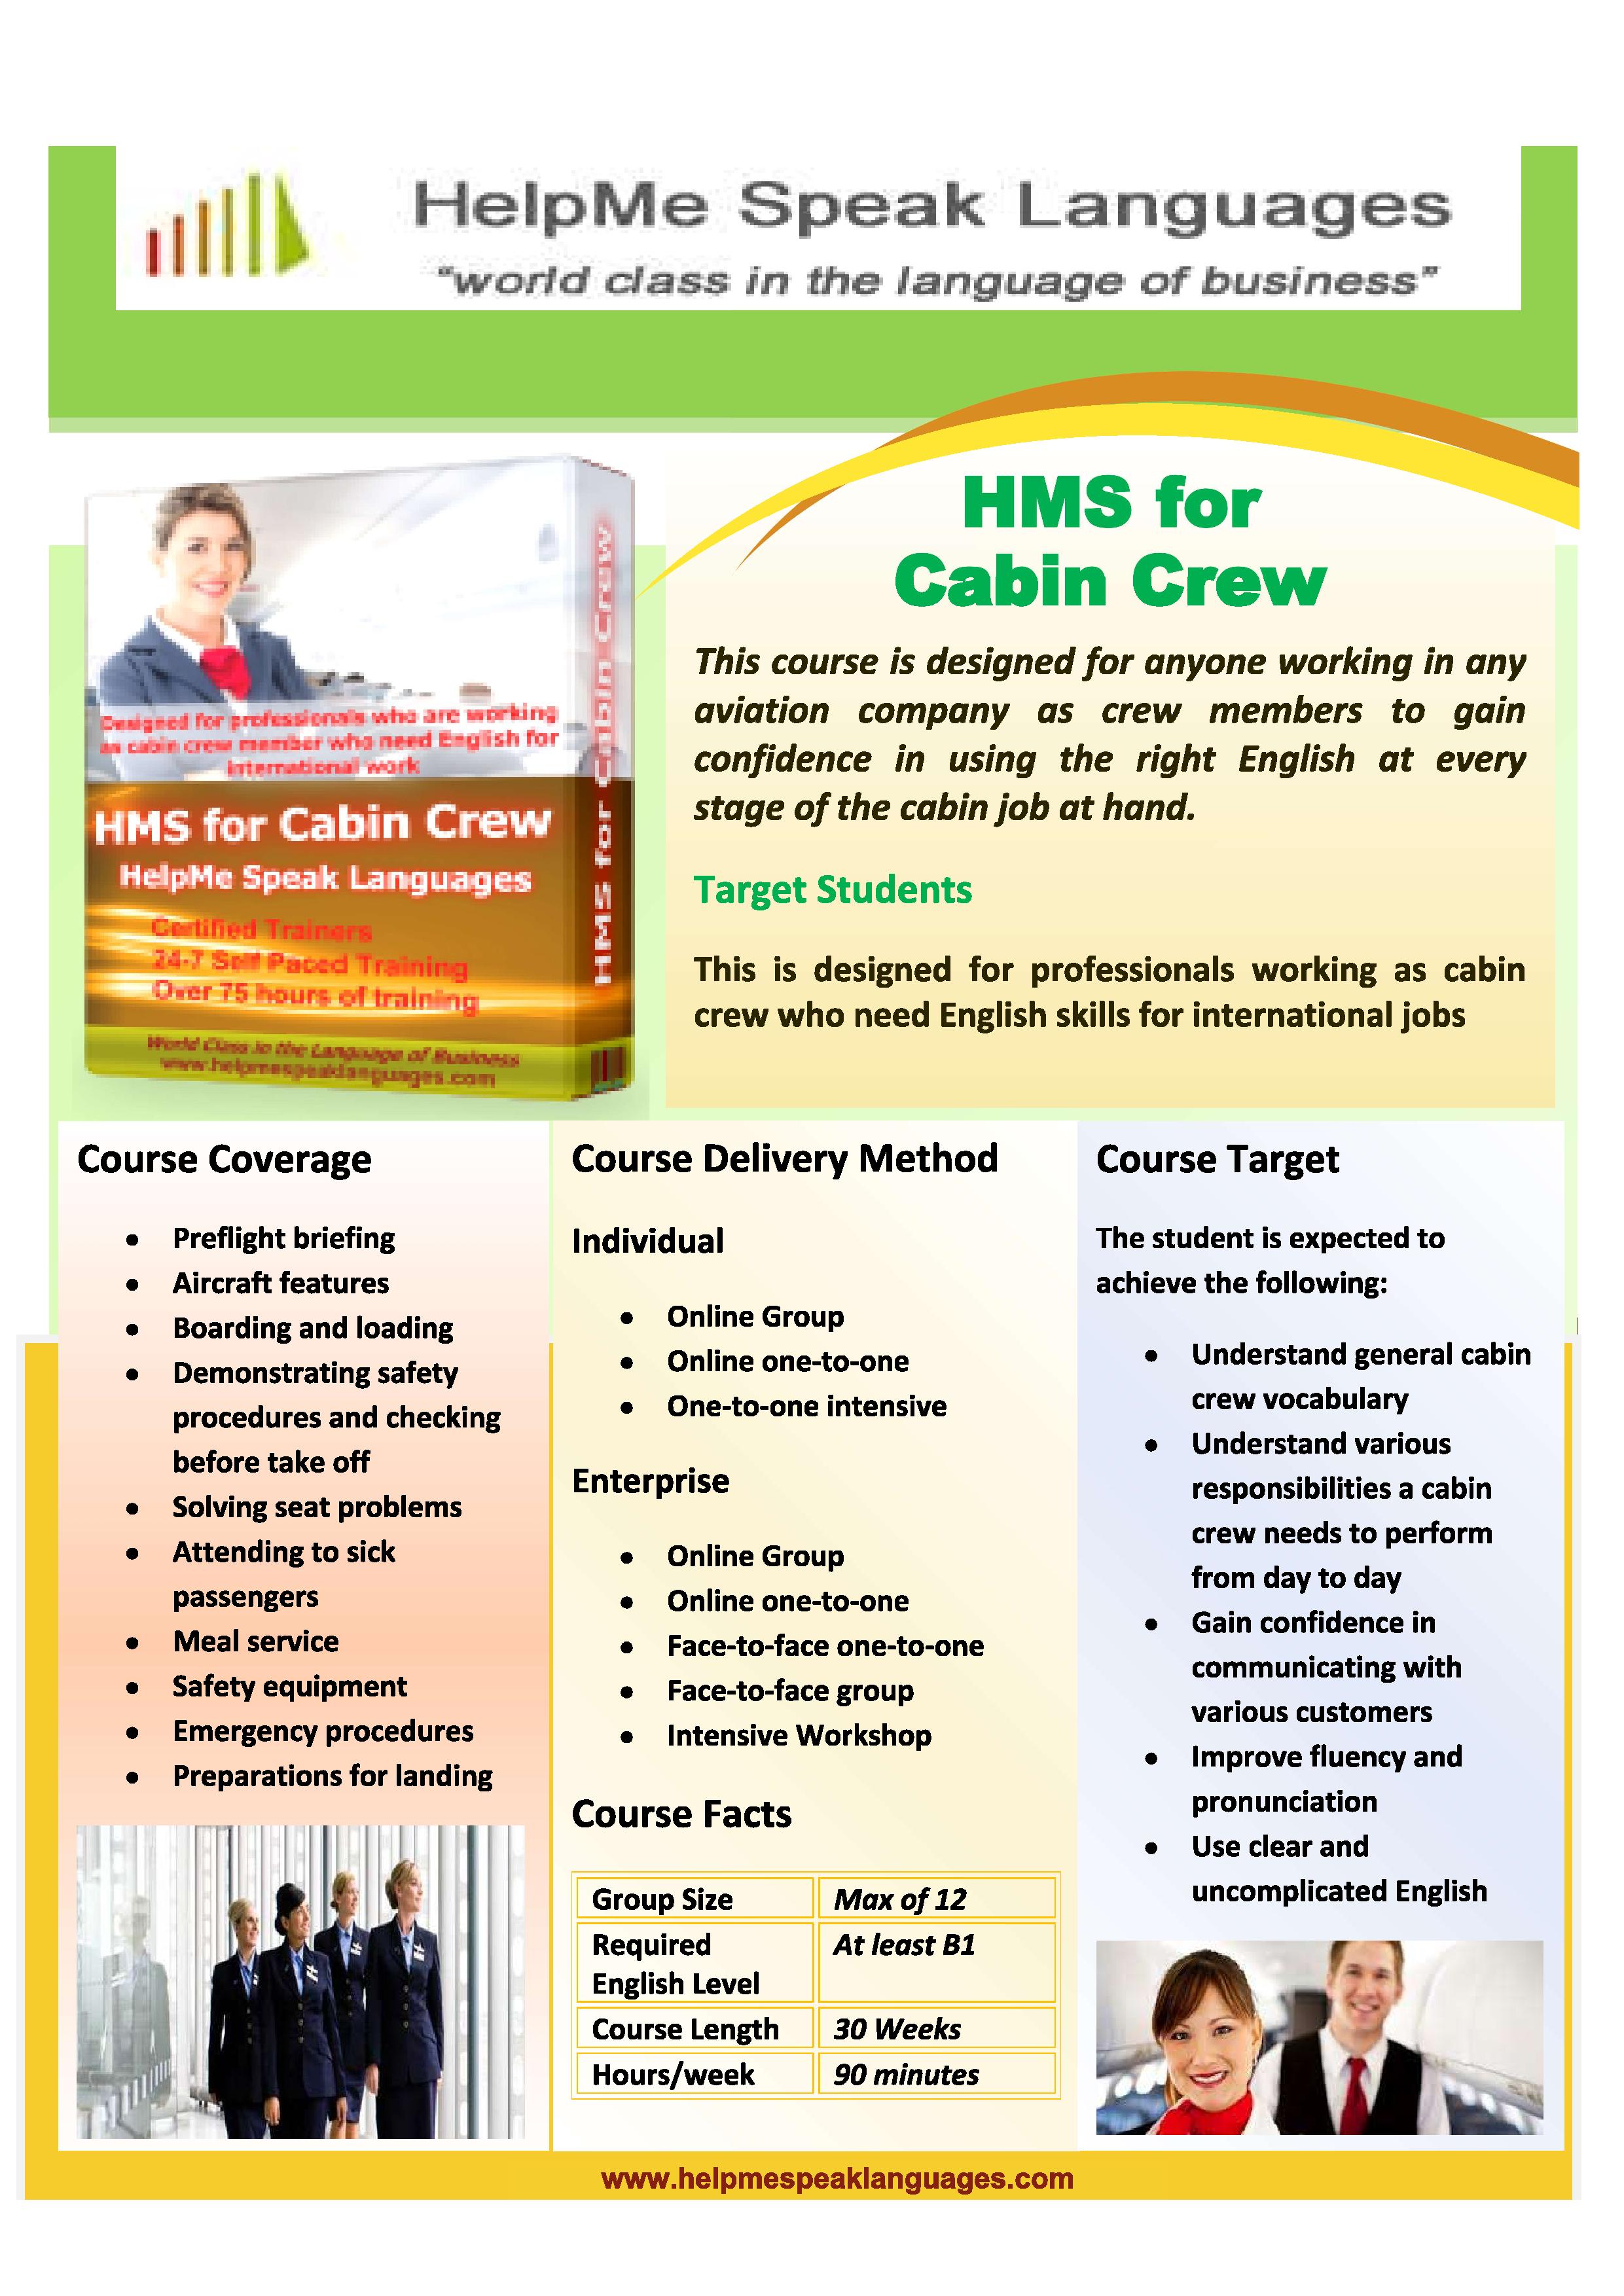 hms-for-cabin-crew-page-001